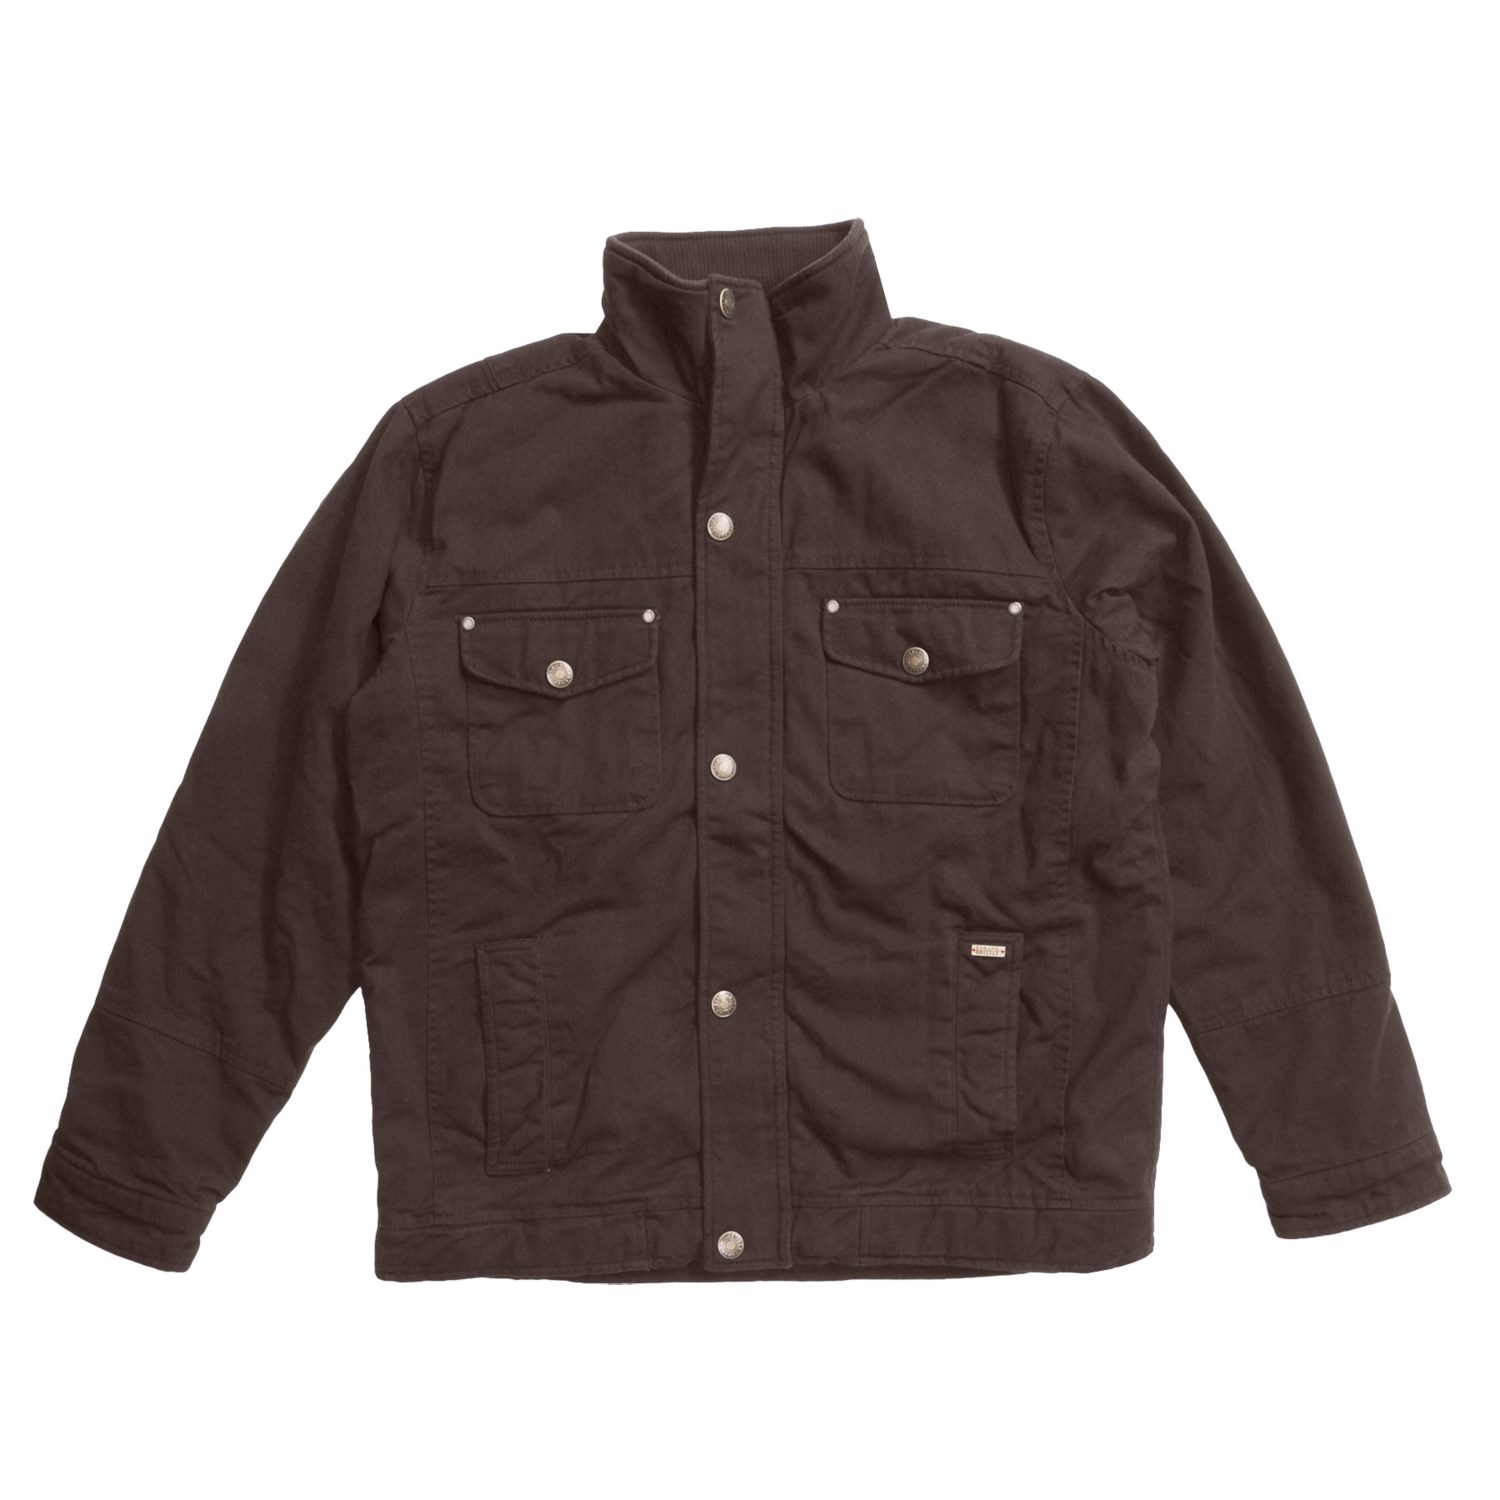 Grizzly Shane Waxed Baby Canvas Coat - Flannel Lining (For Men) - Save 43%